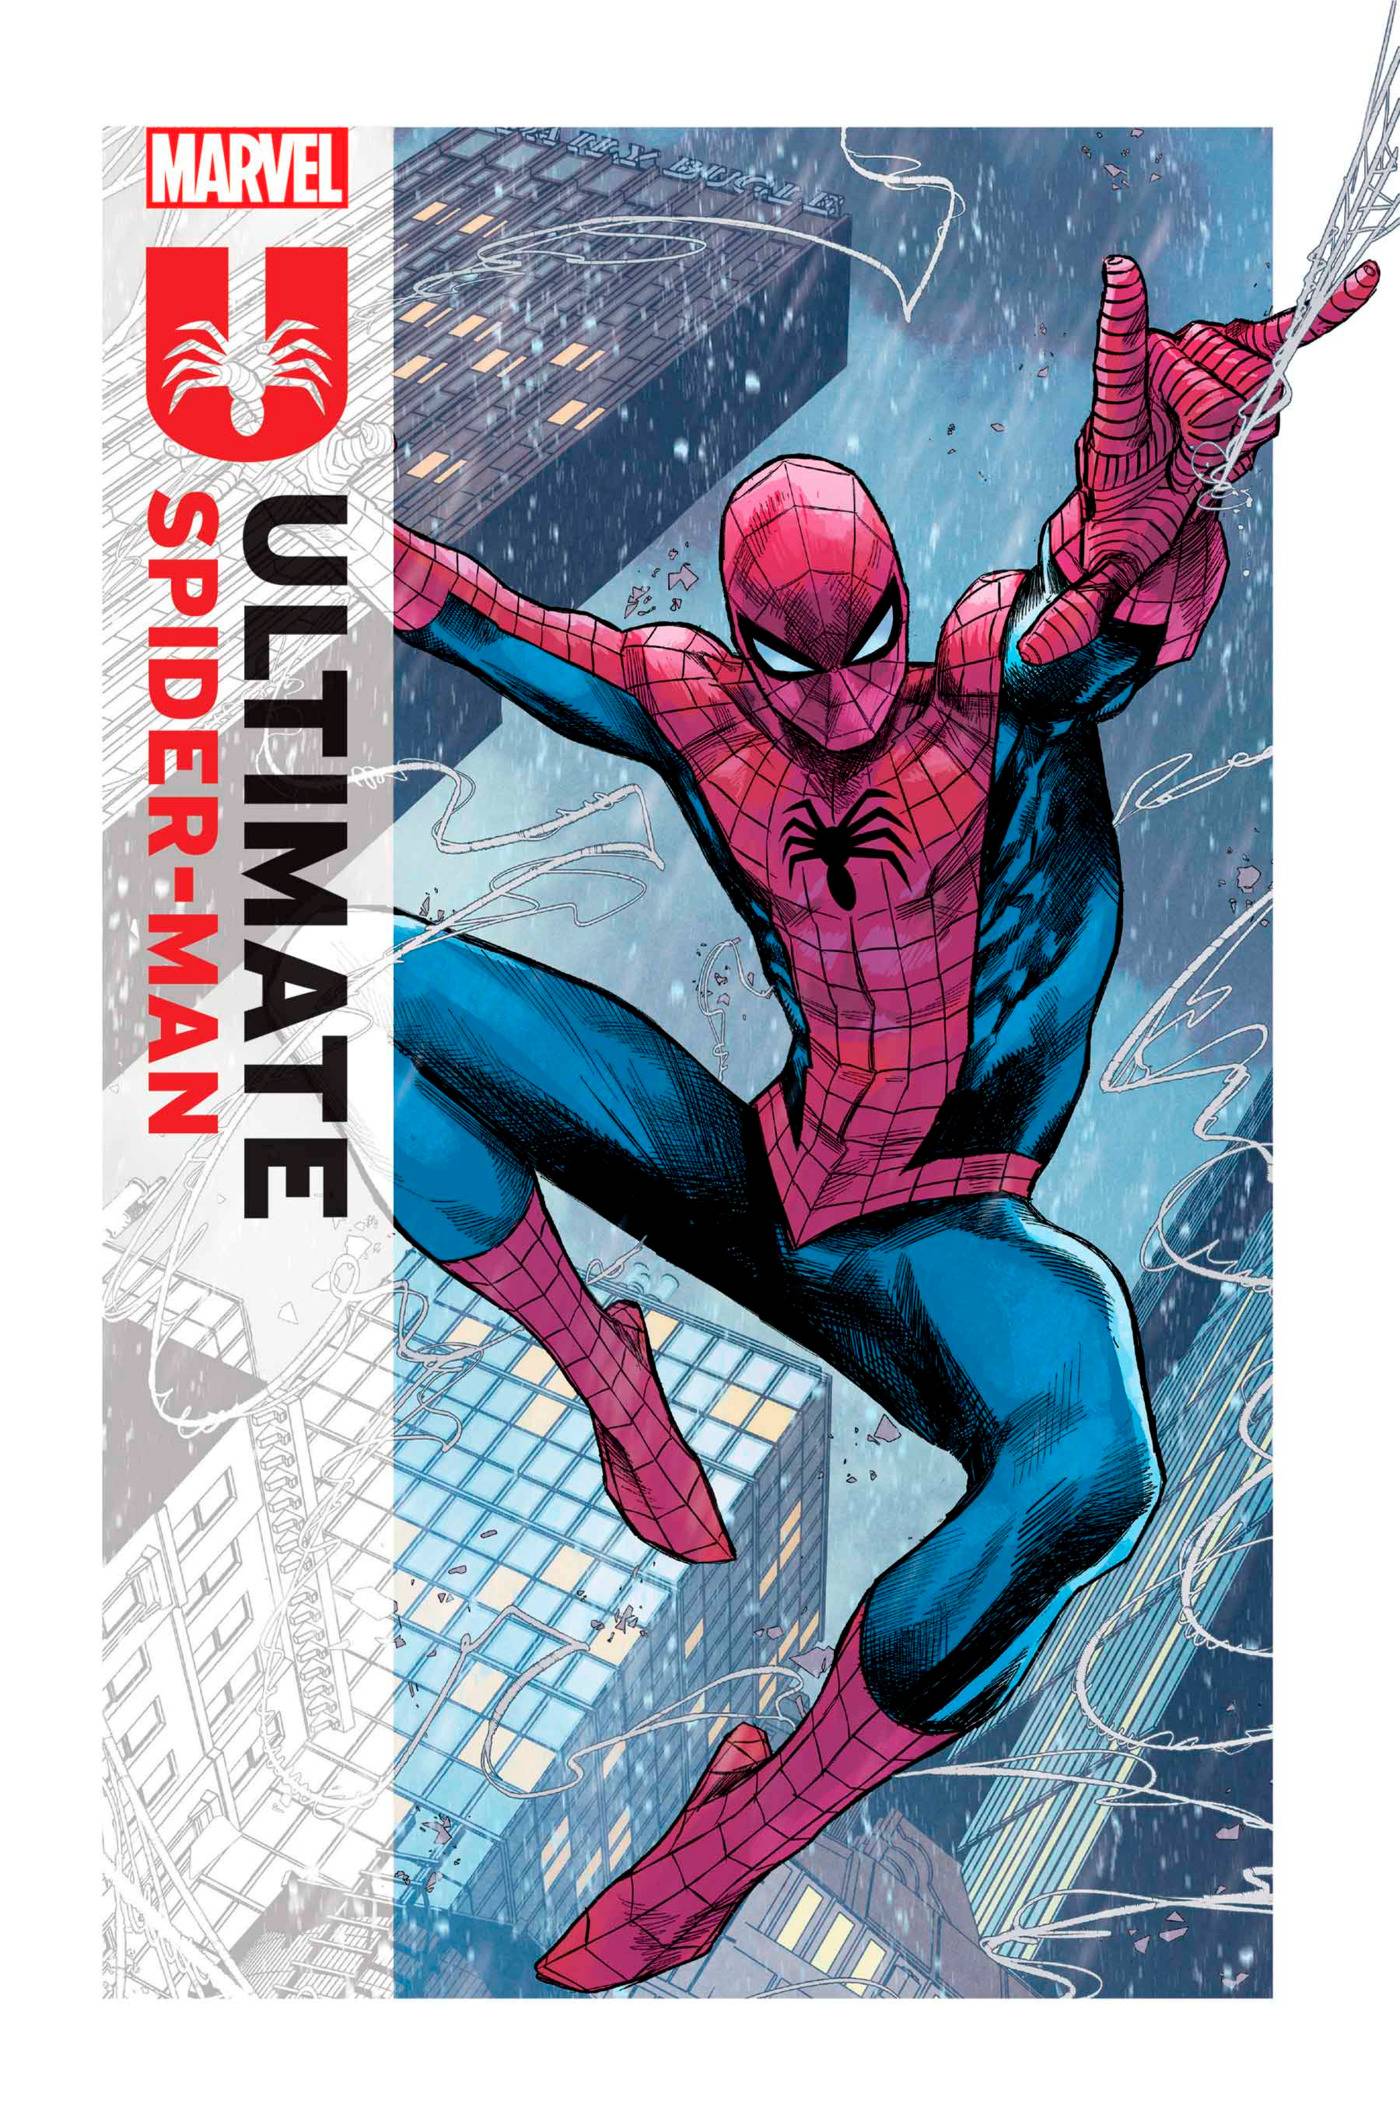 Who is ultimate spider man